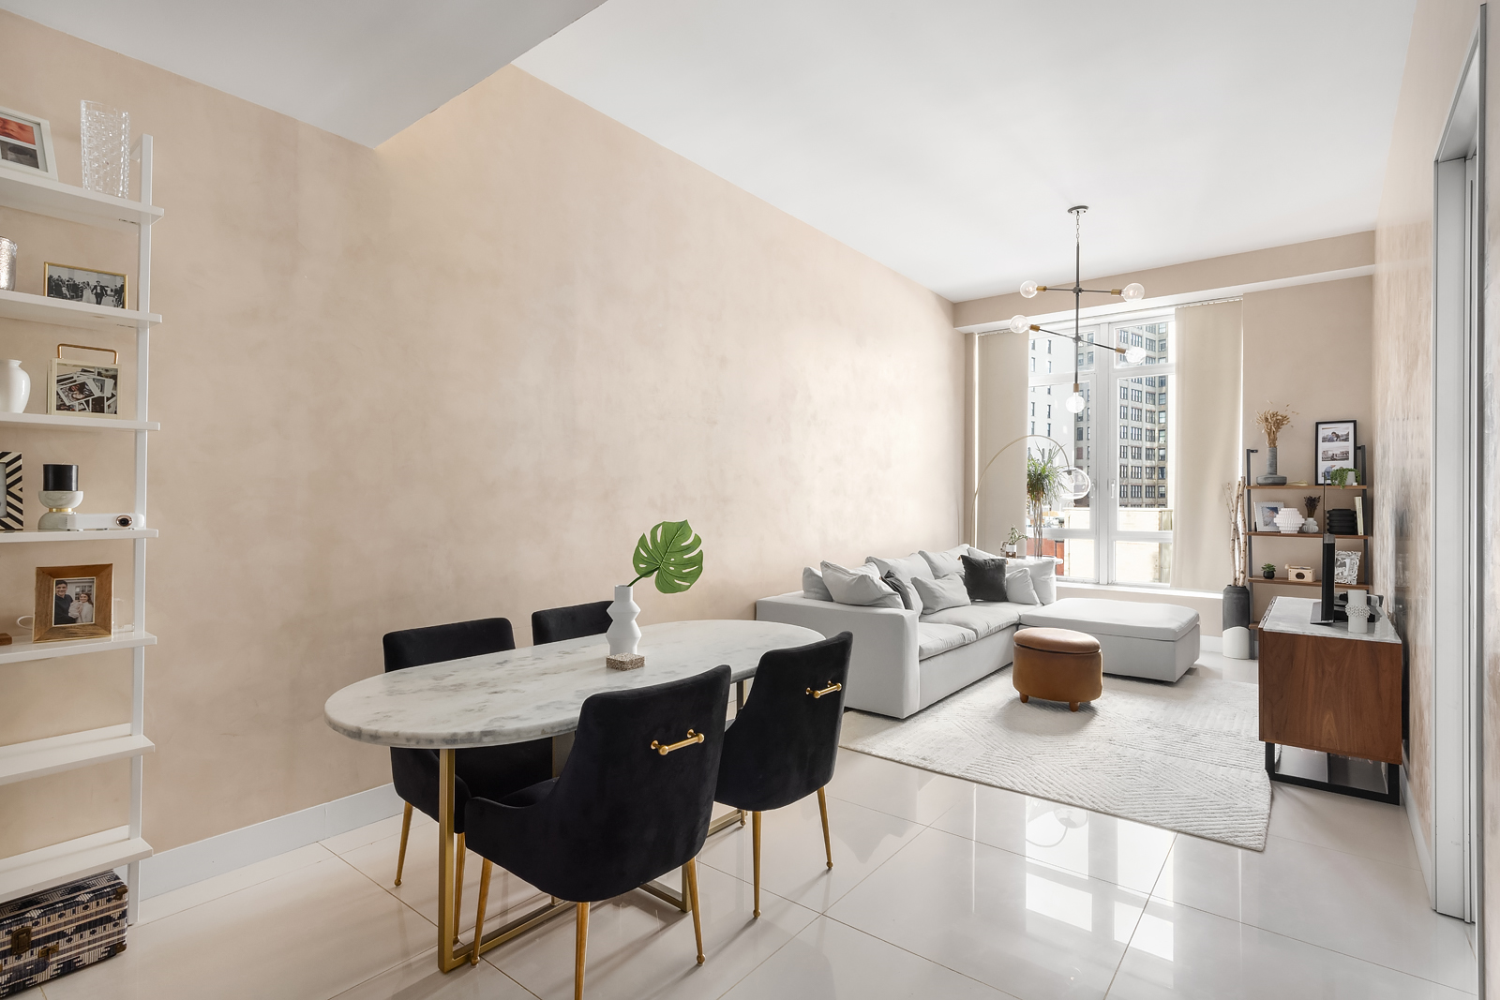 111 Fulton Street 806, Lower Manhattan, Downtown, NYC - 2 Bedrooms  
2 Bathrooms  
4 Rooms - 